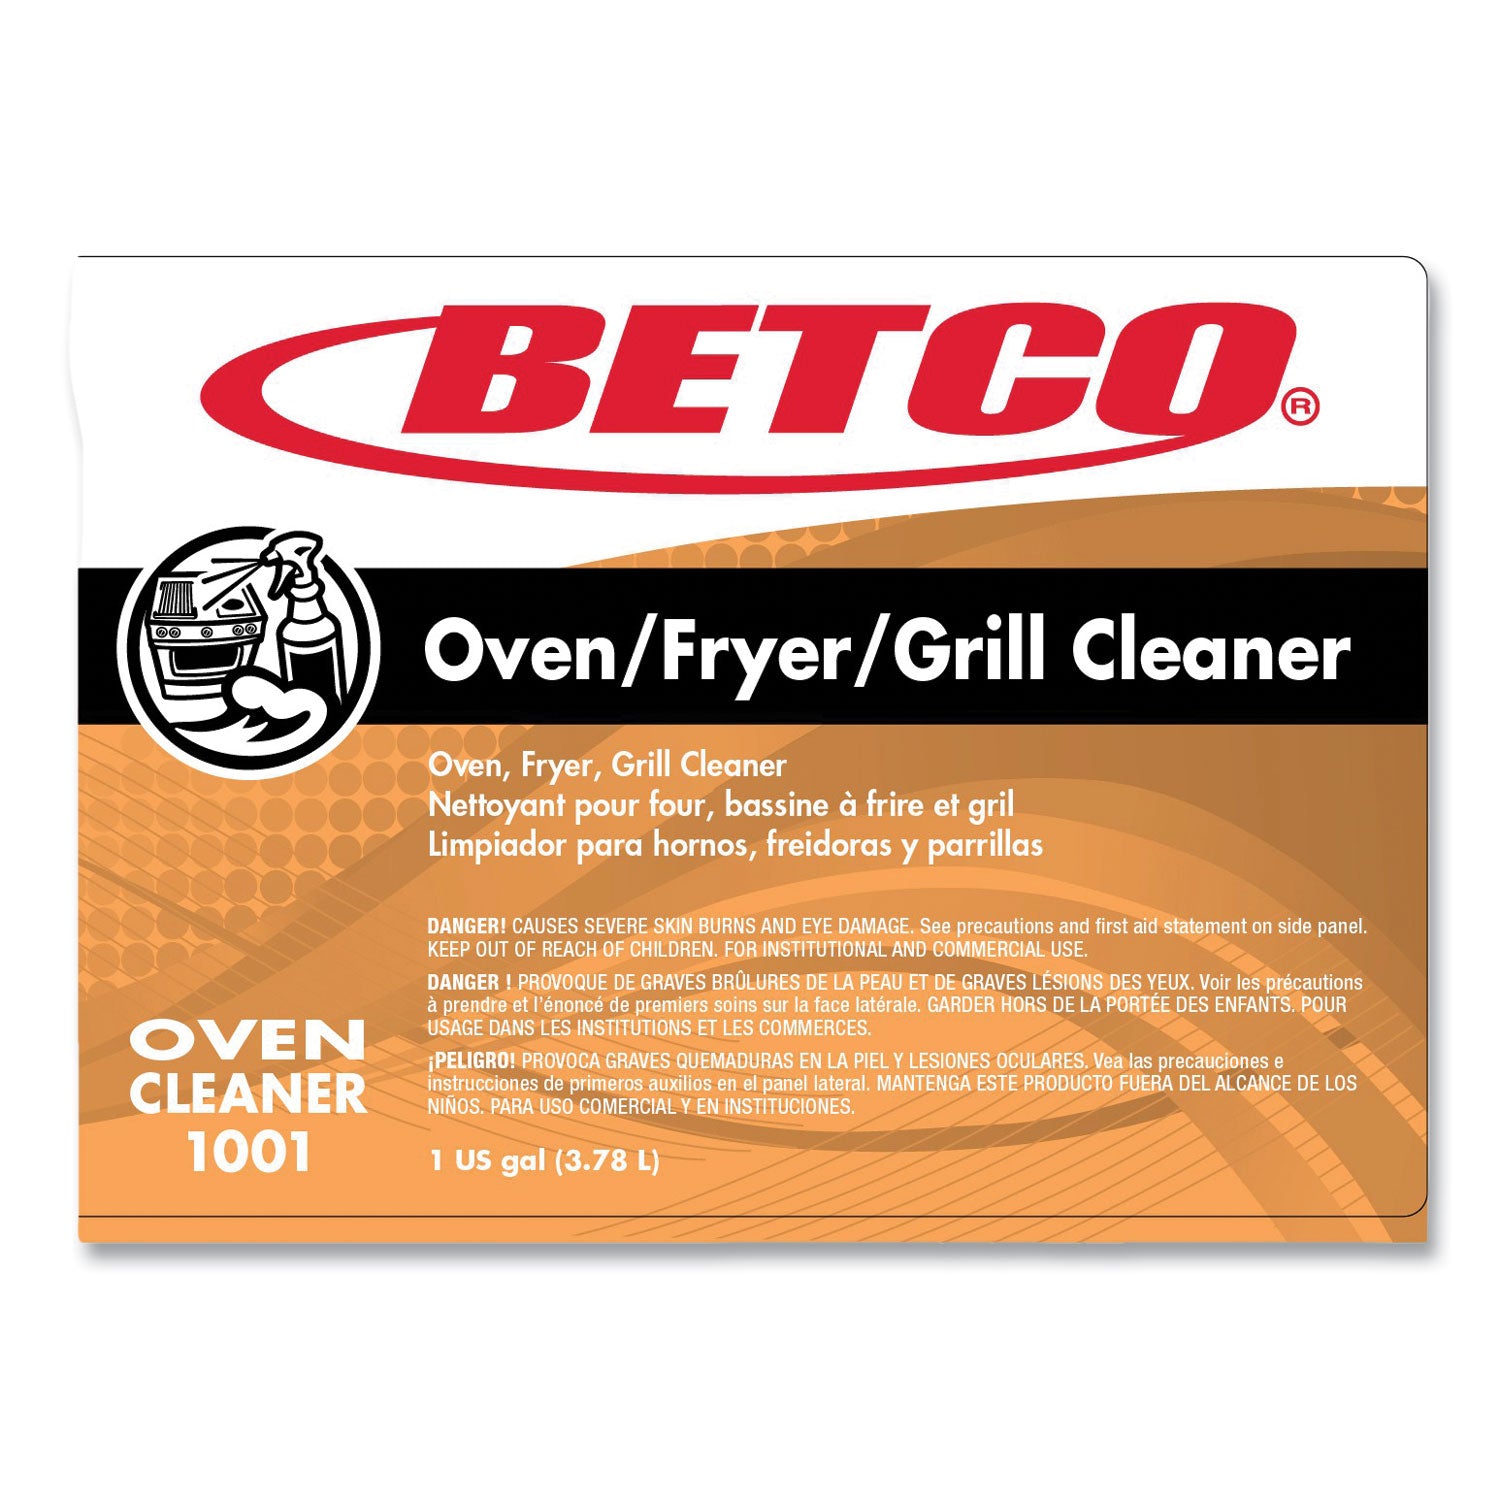 oven-fryer-grill-cleaner-characteristic-scent-1-gal-bottle-4-carton_bet10010400 - 8